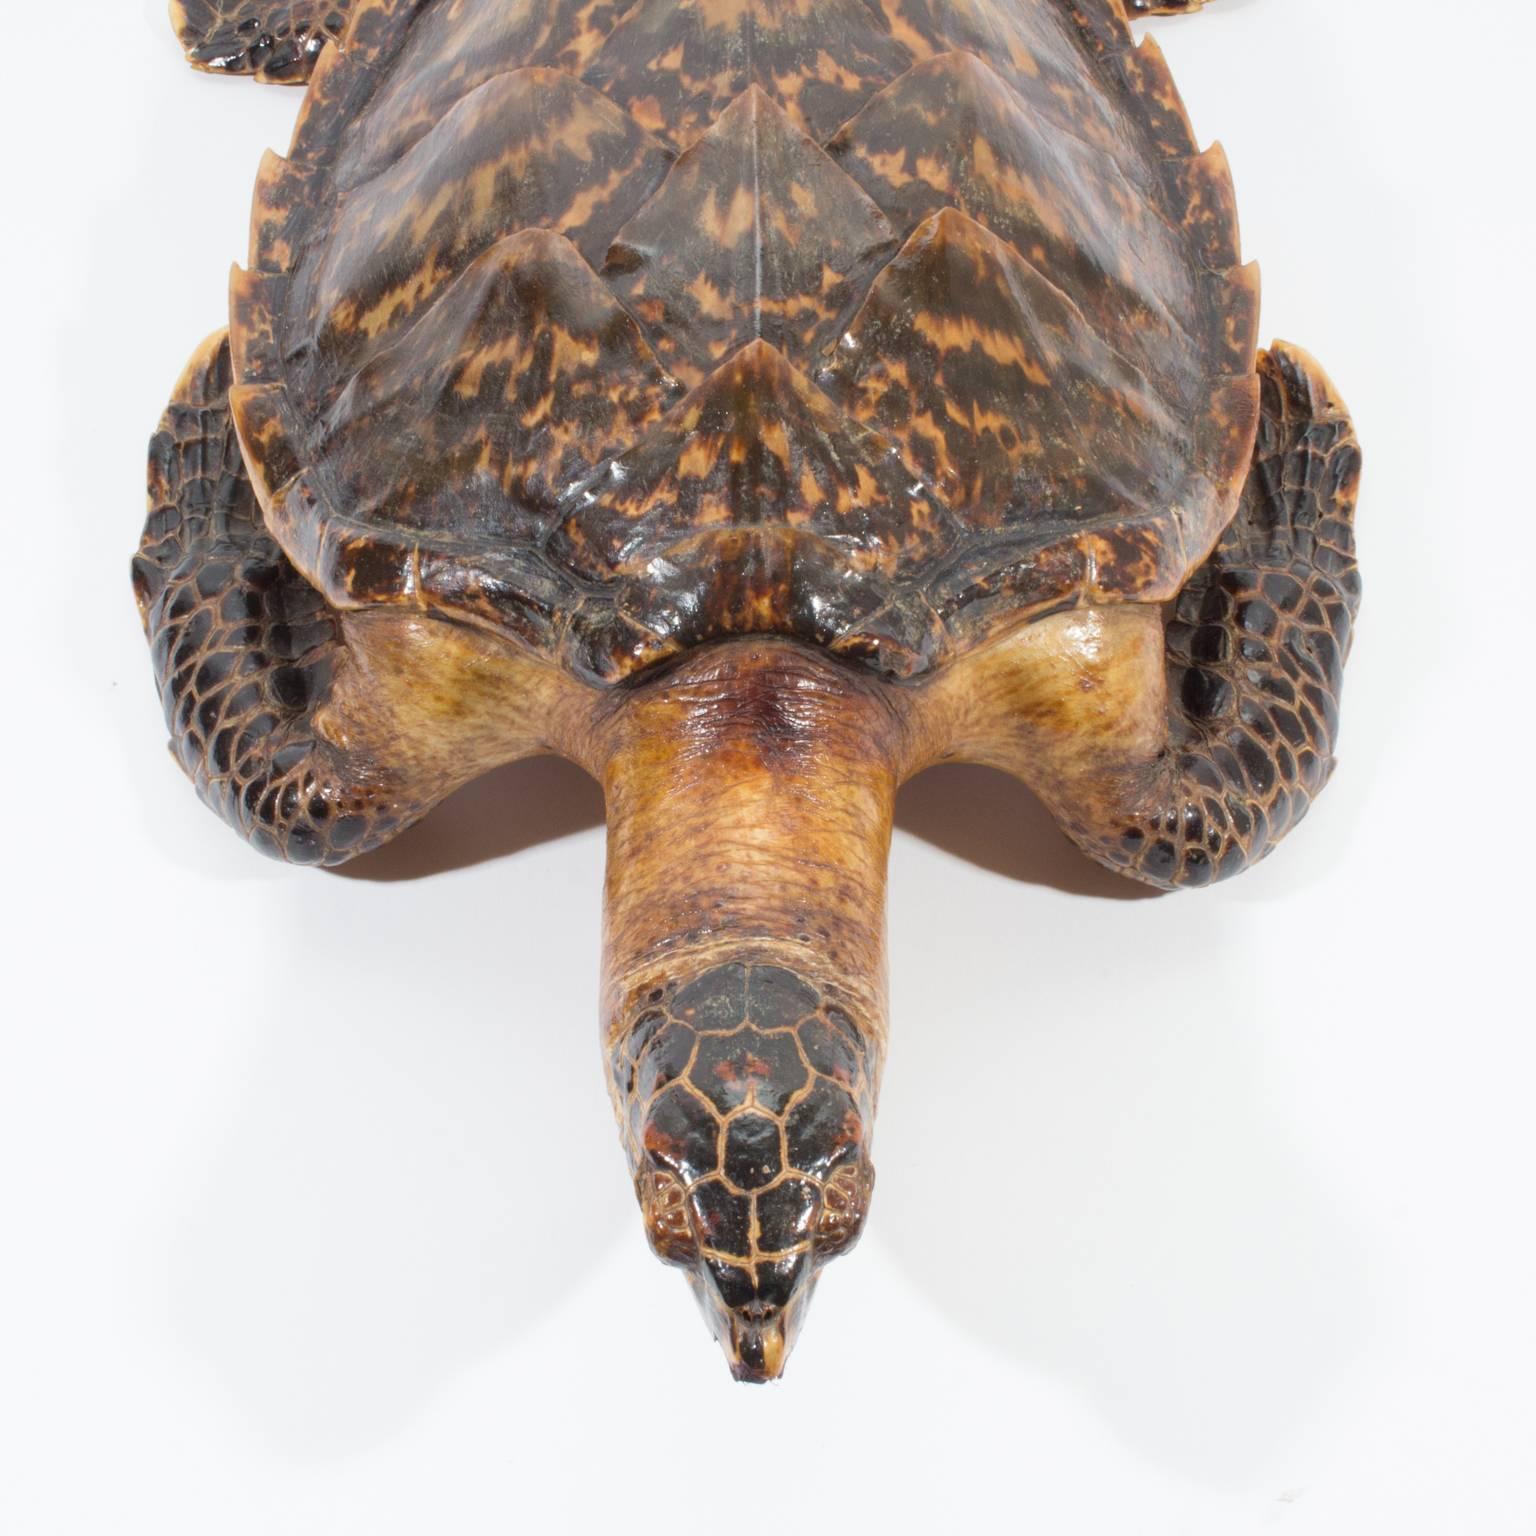 Tortoise Shell Antique Taxidermy Sea Turtle Tortoise Found in France